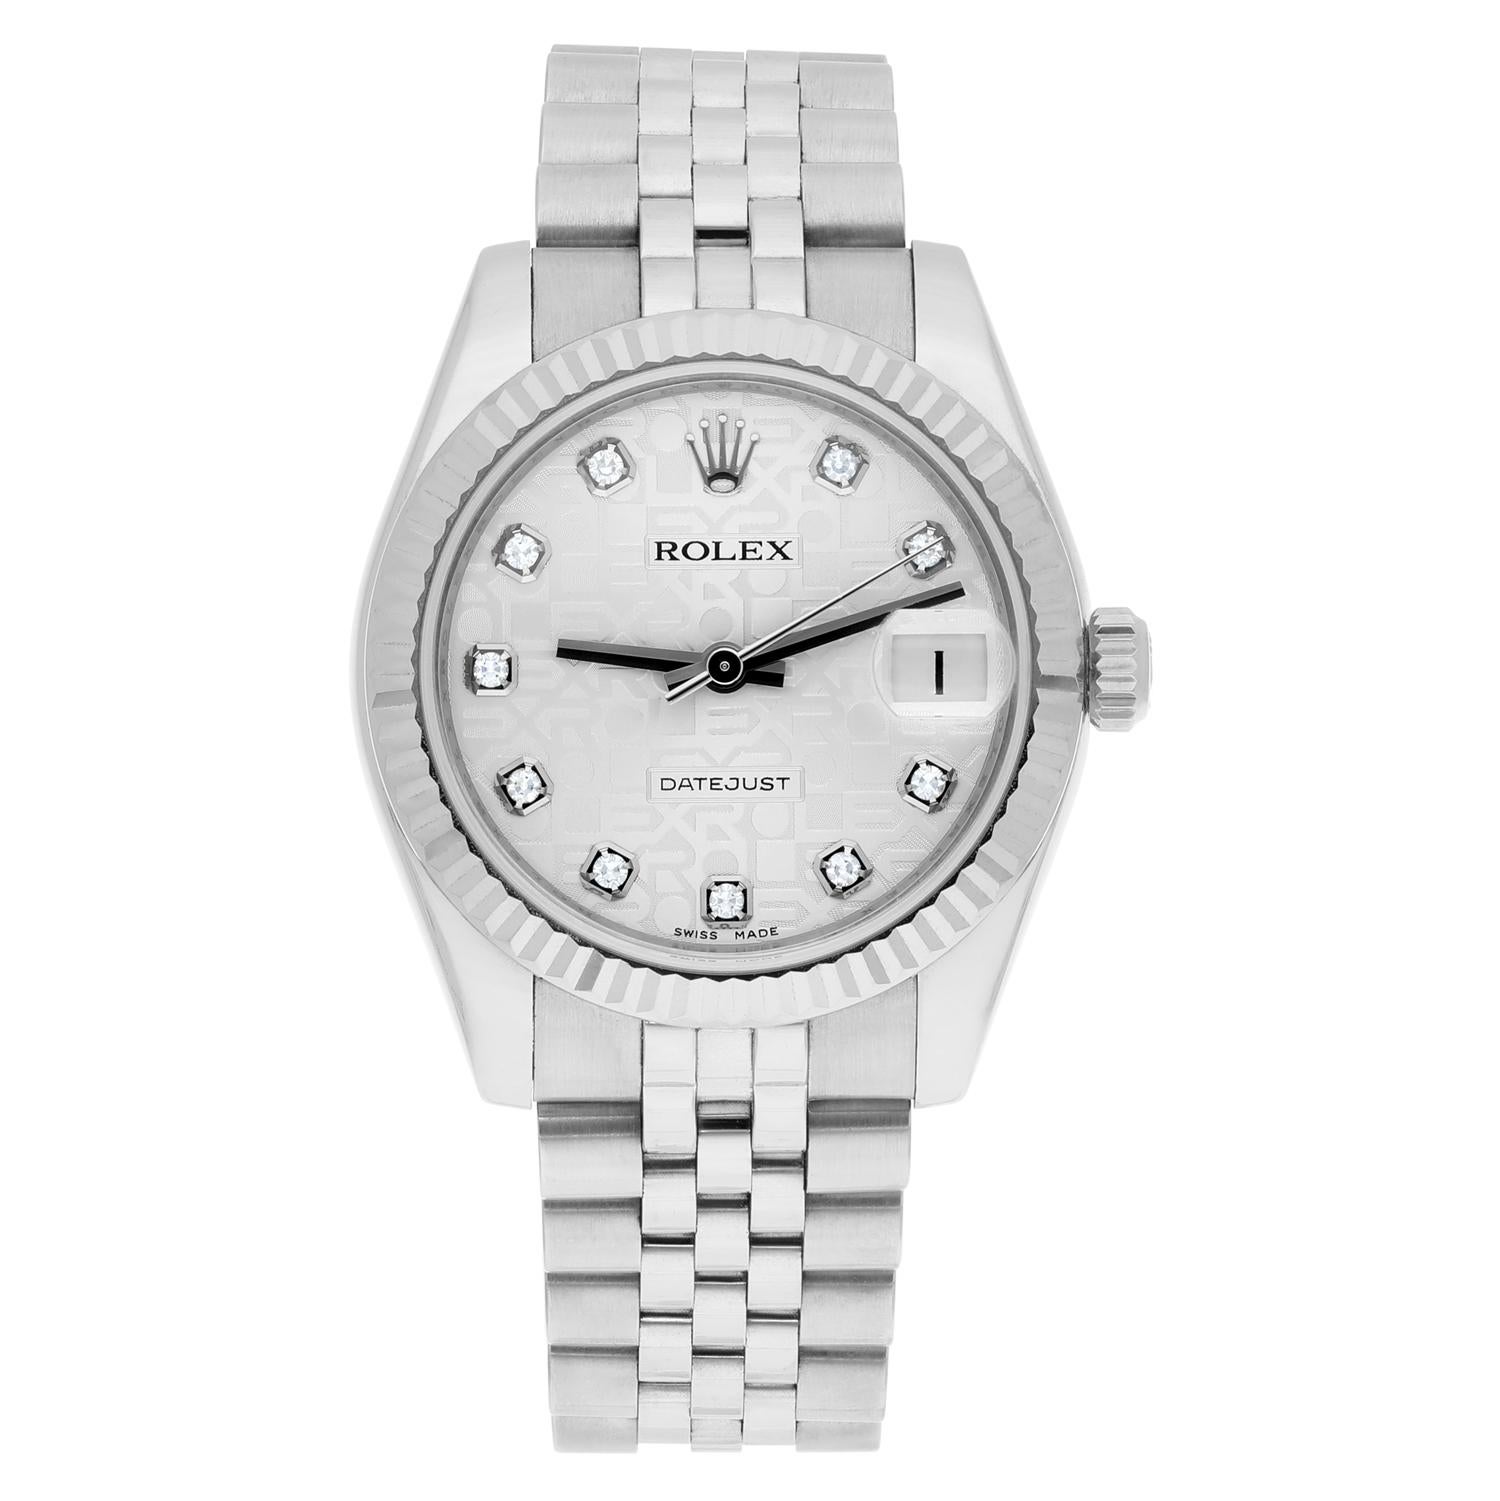 This luxurious Rolex Datejust wristwatch is a stunning piece of jewelry and a true work of art. It features a 31mm silver case with a fluted bezel and a solid caseback. The watch is powered by a mechanical (automatic) movement and has a water